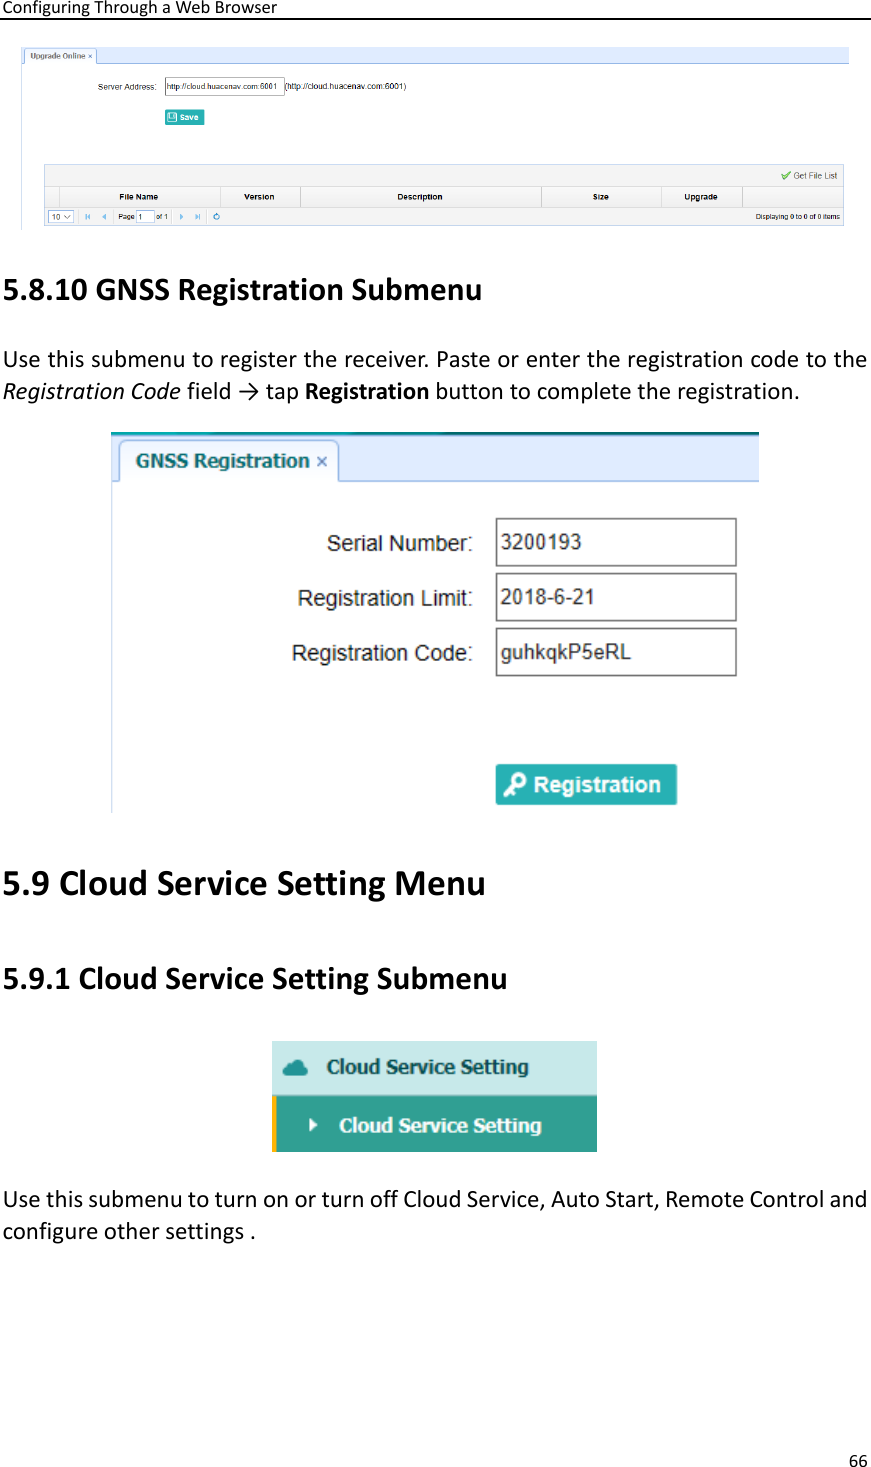 Configuring Through a Web Browser 66   5.8.10 GNSS Registration Submenu Use this submenu to register the receiver. Paste or enter the registration code to the Registration Code field → tap Registration button to complete the registration.    5.9 Cloud Service Setting Menu 5.9.1 Cloud Service Setting Submenu  Use this submenu to turn on or turn off Cloud Service, Auto Start, Remote Control and configure other settings . 